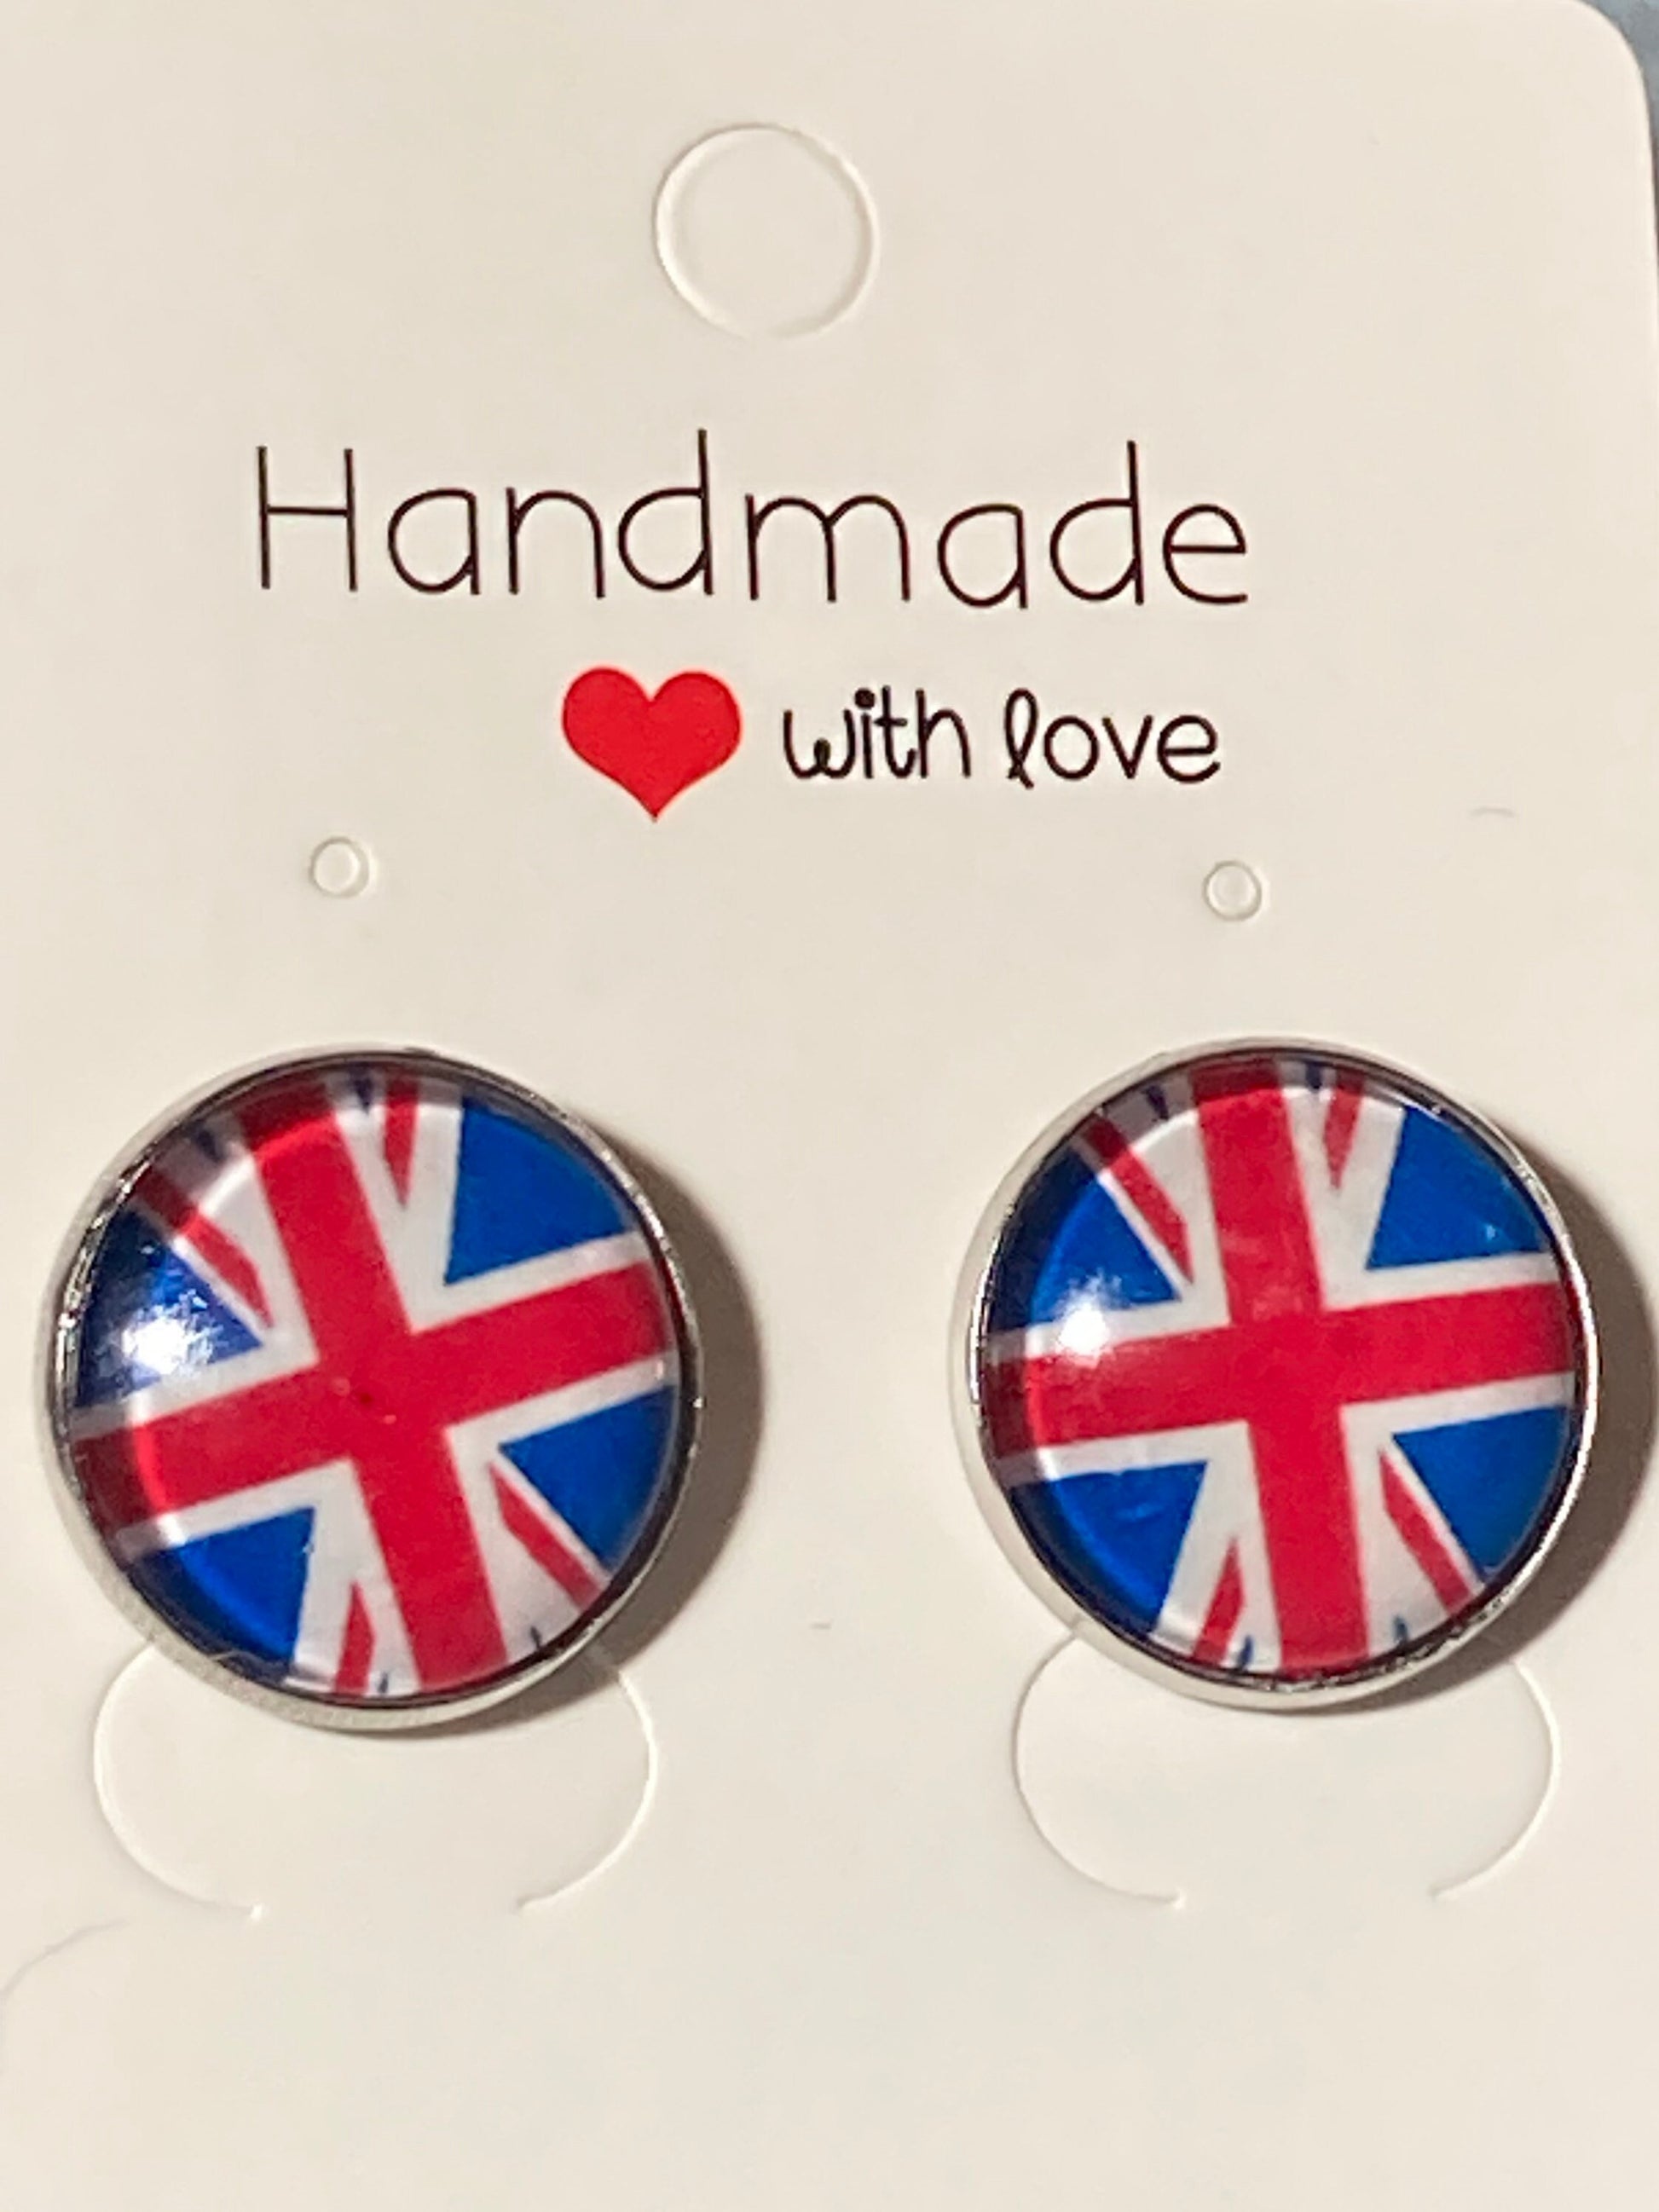 Uk Union Jack flag royal pierced round silver stud earrings with 16mm glass cabochons